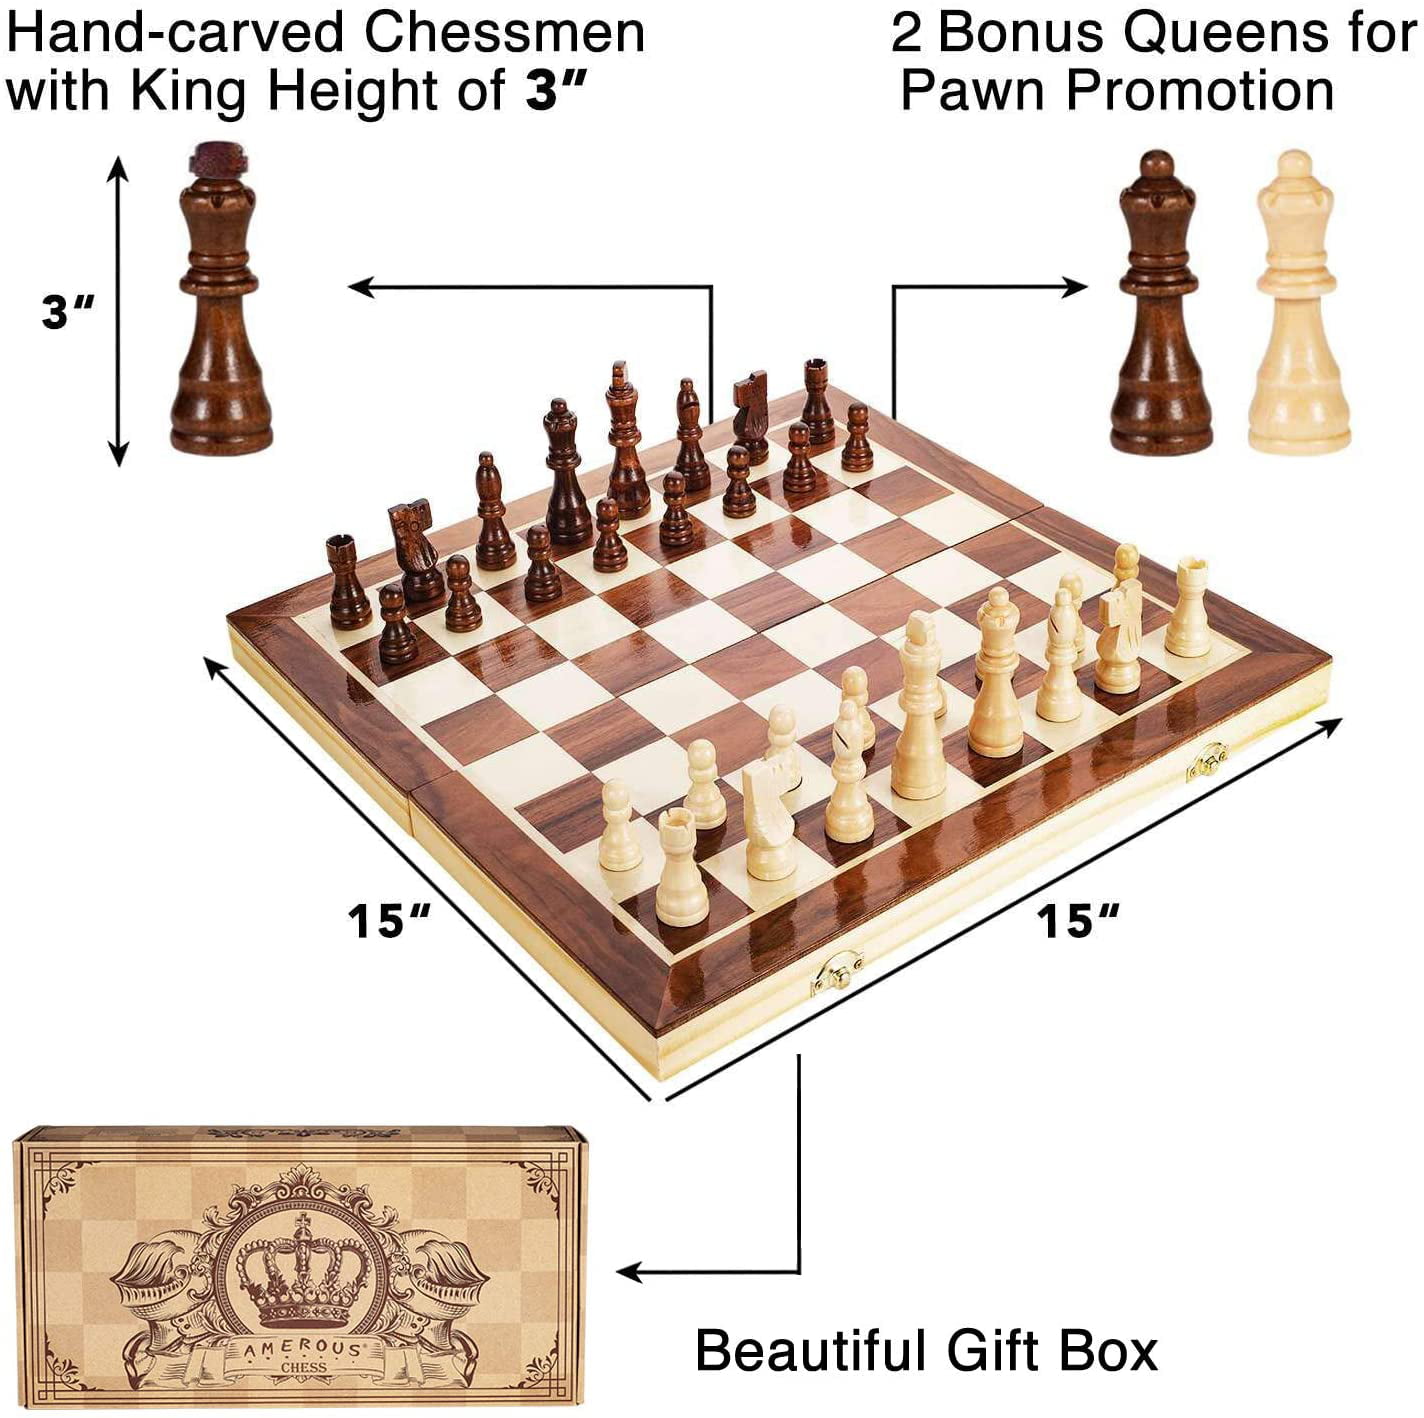 LANGWEI Wooden Chess Set,Classic Family Chess Board Game with Storage Drawer & Game Pieces Slots,Travel Chess Board Set for Children and Chess Lovers,S